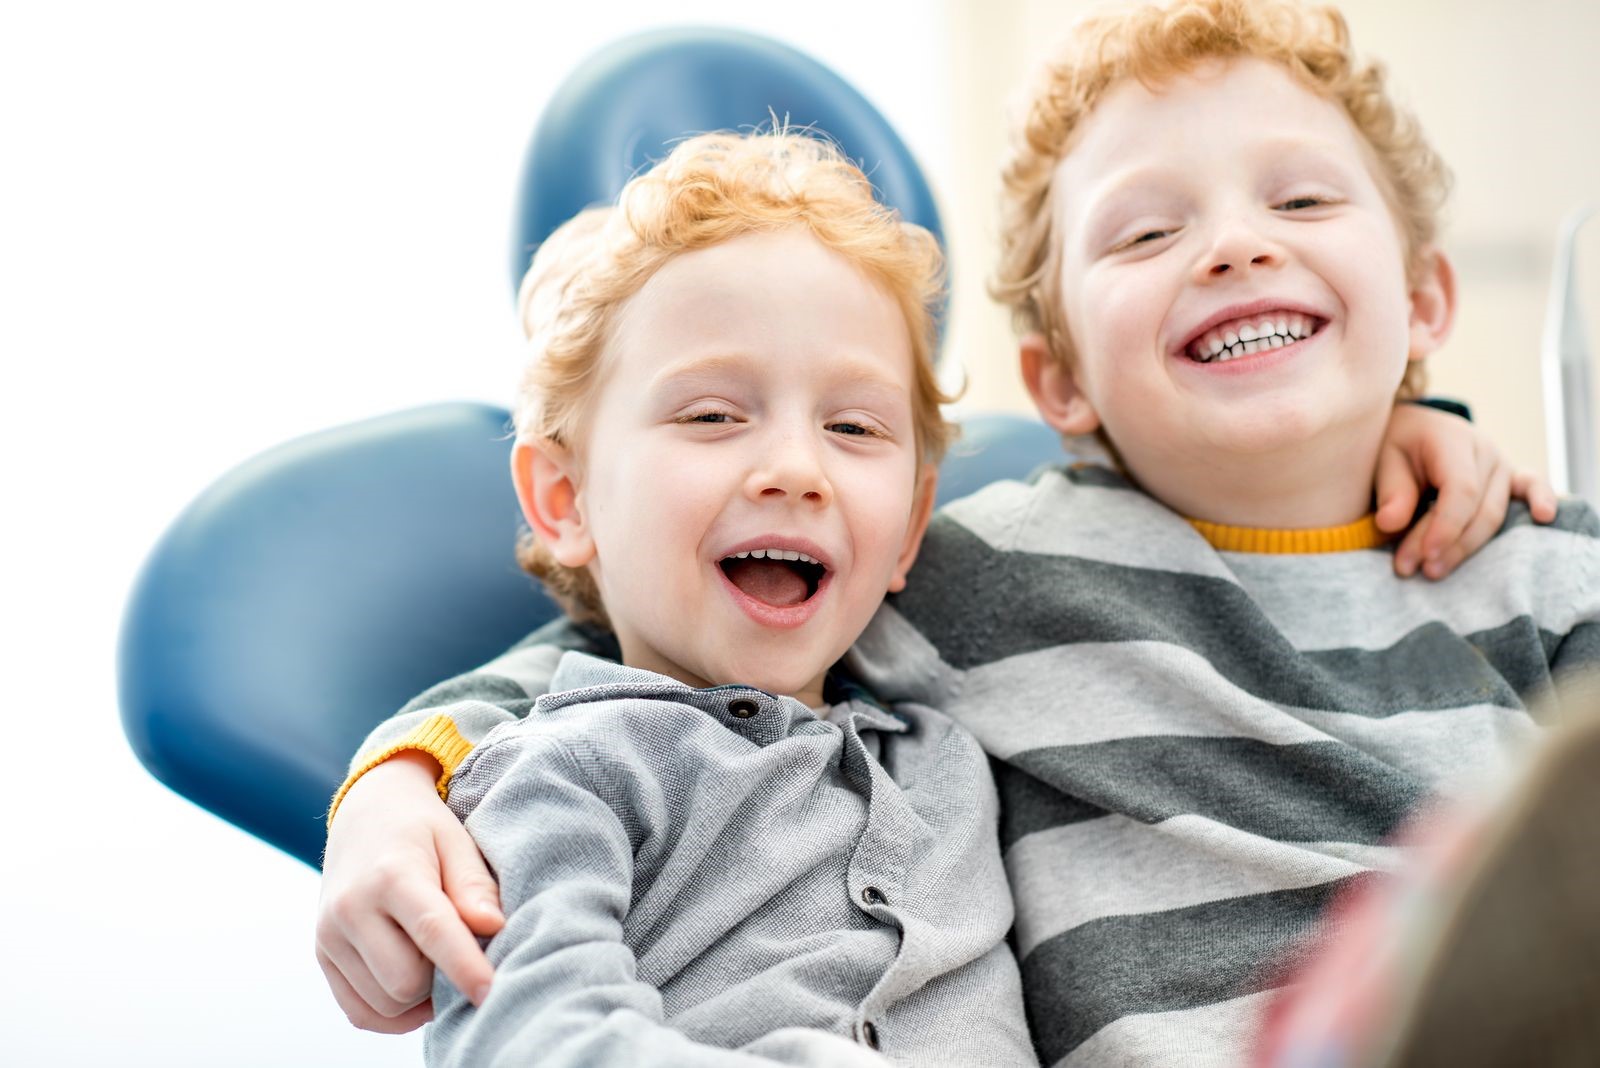 The Magic of Pediatric Dentistry: Keeping Children's Smiles Bright